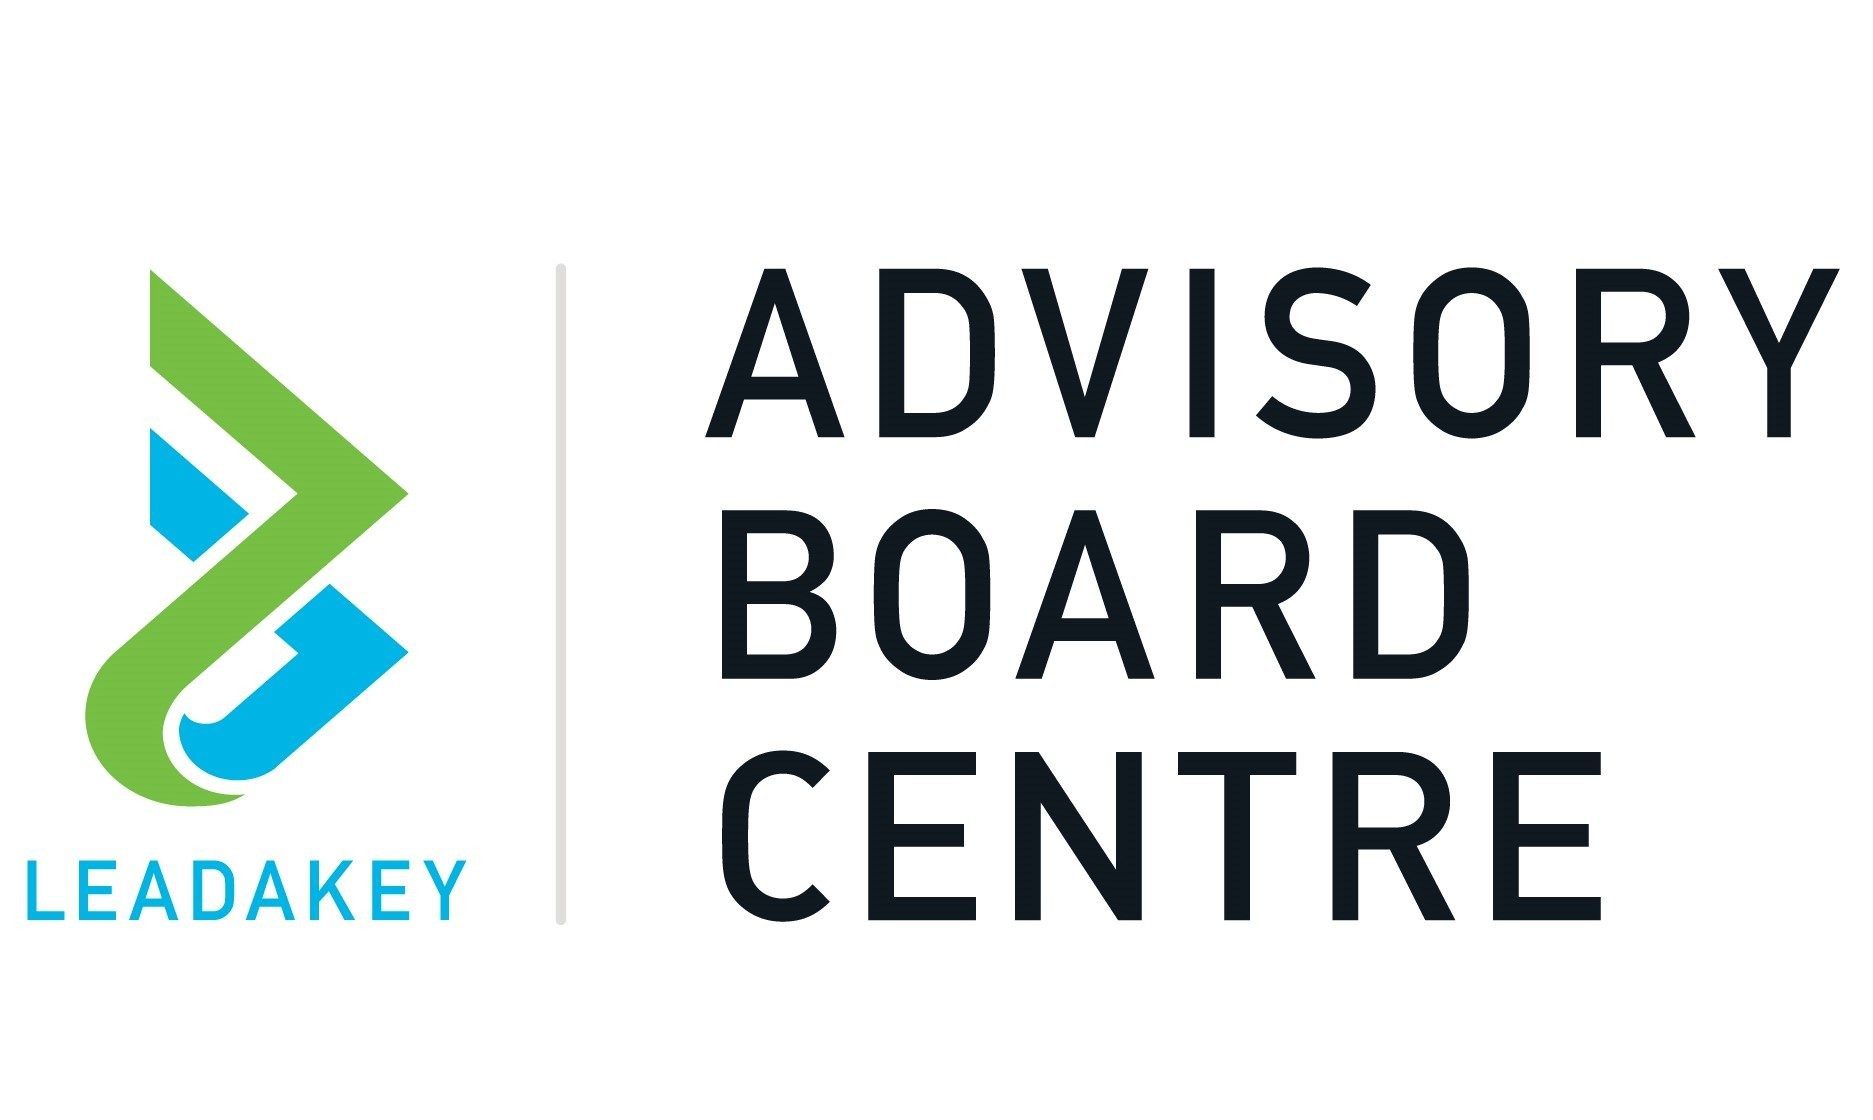 SETTING UP AN ADVISORY BOARD FOR YOUR BUSINESS